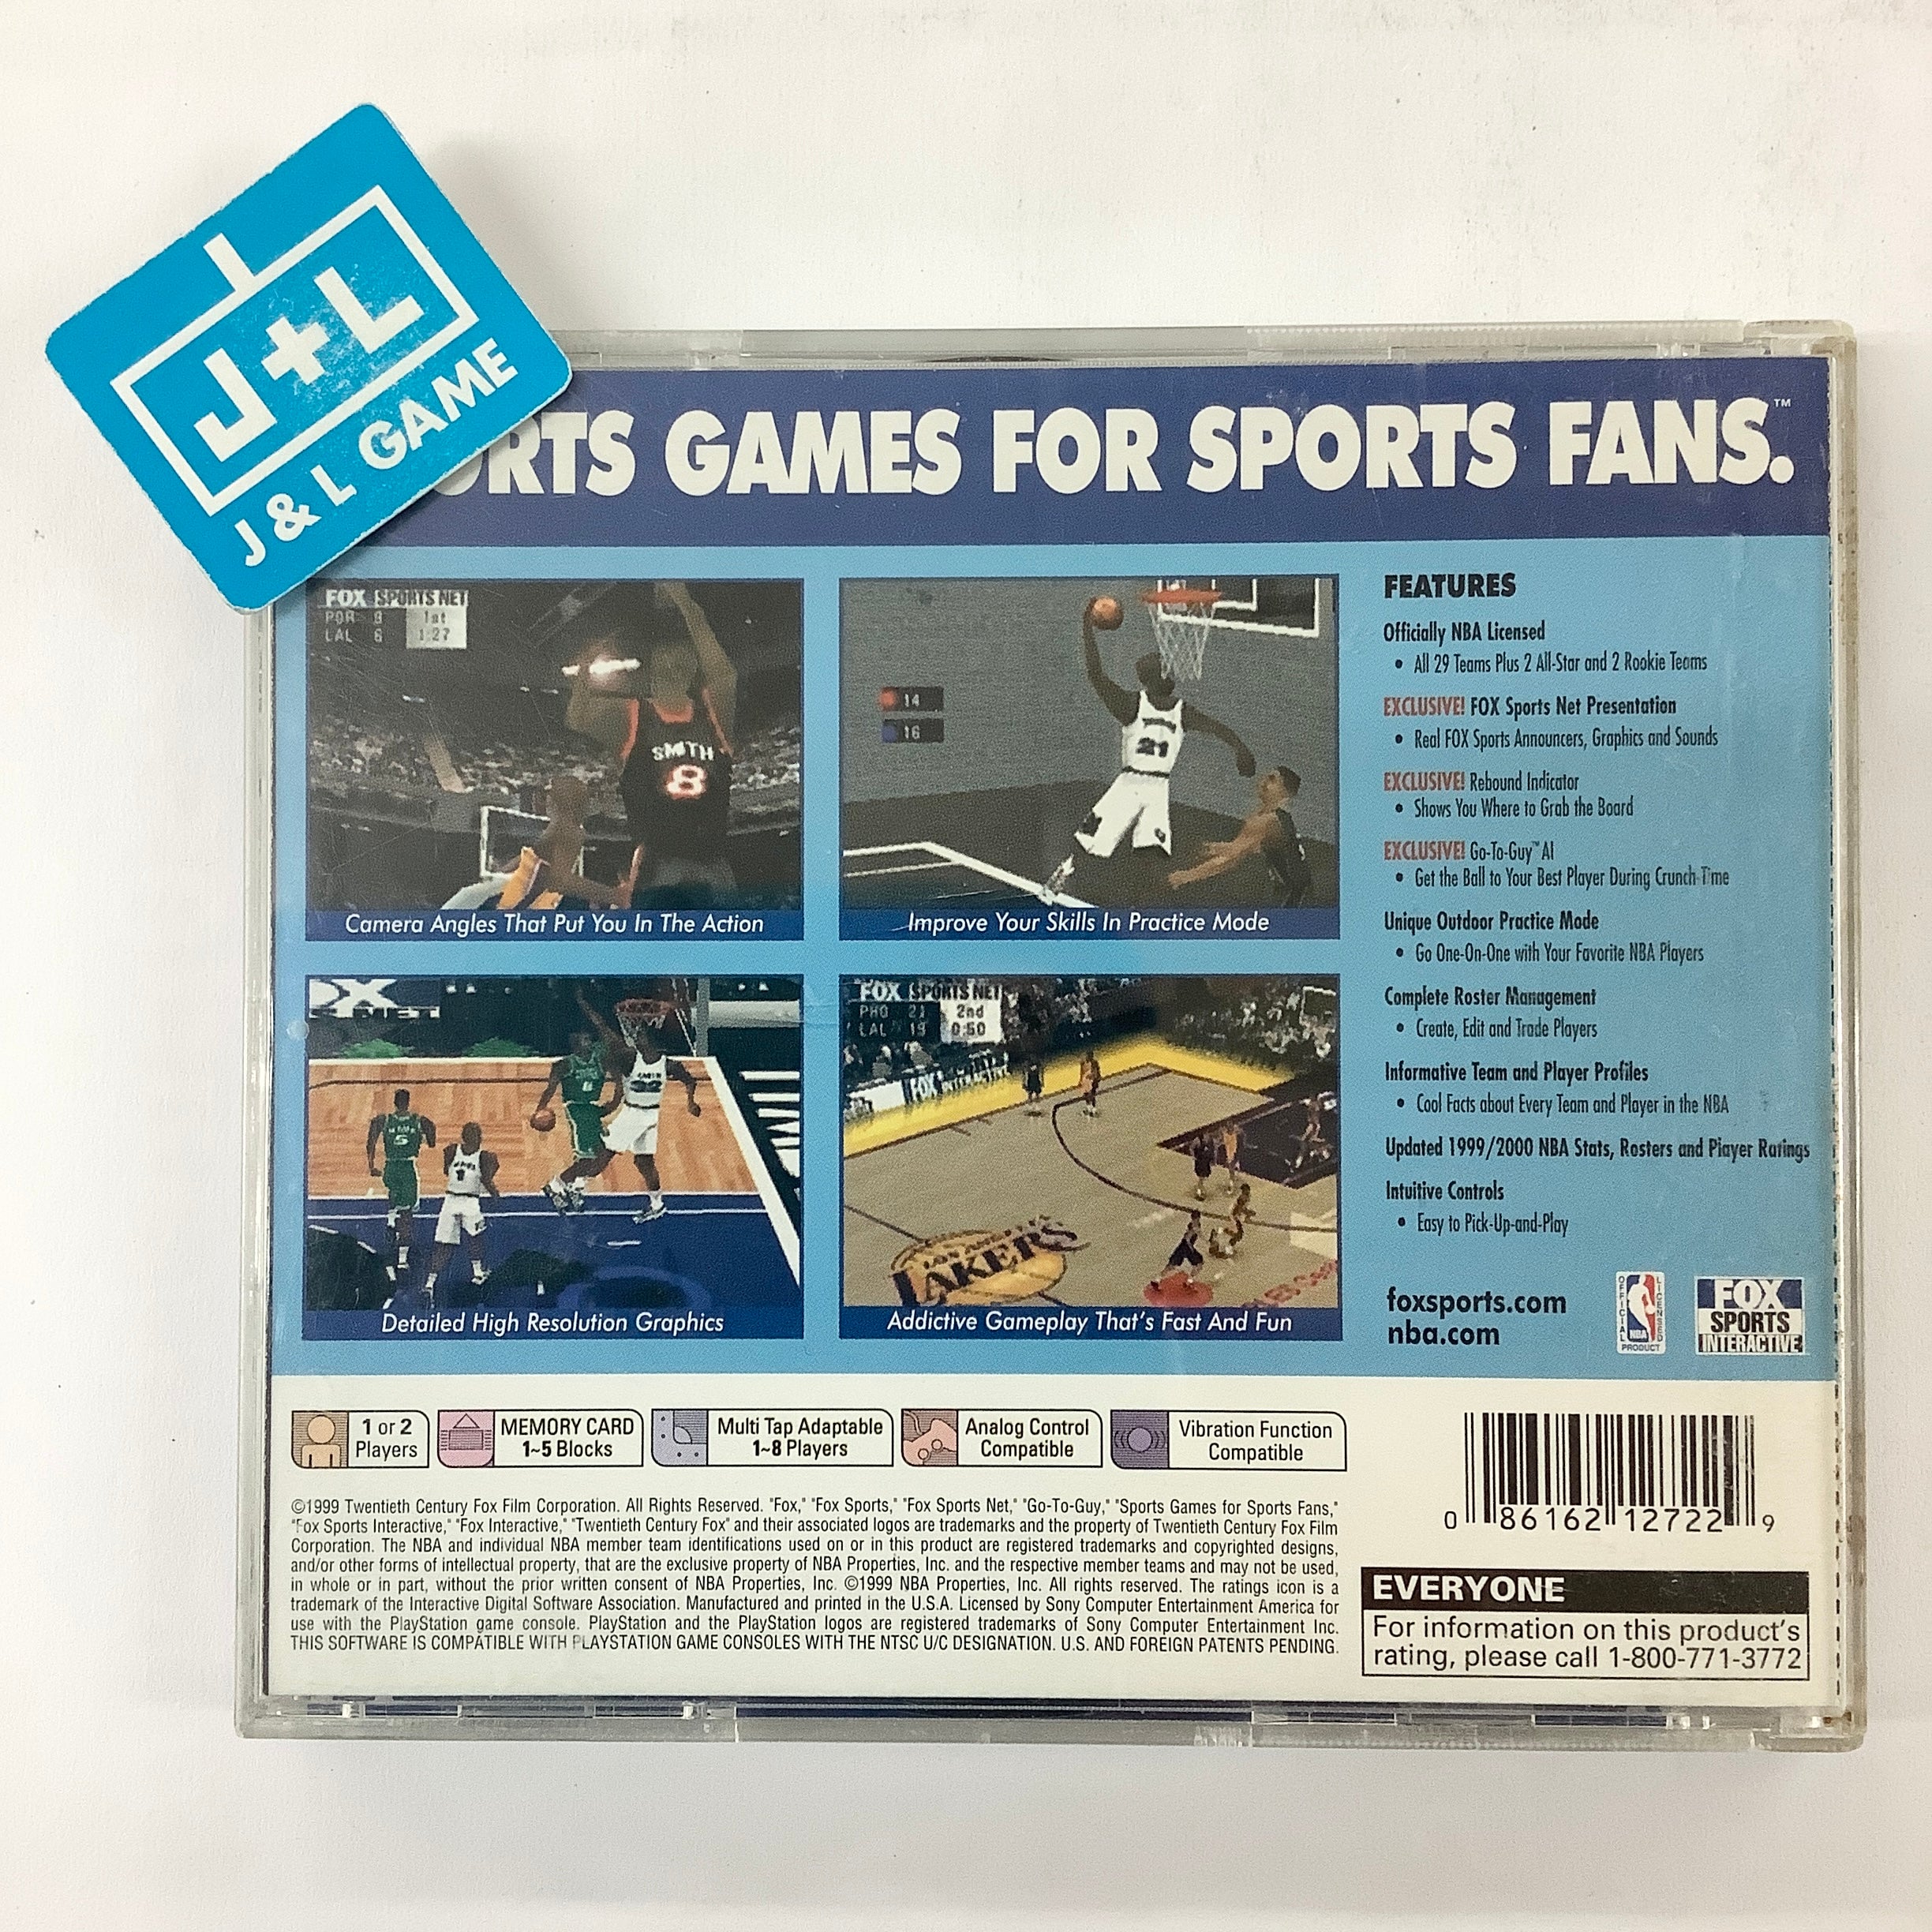 NBA Basketball 2000 - (PS1) PlayStation 1 [Pre-Owned] Video Games Fox Interactive   